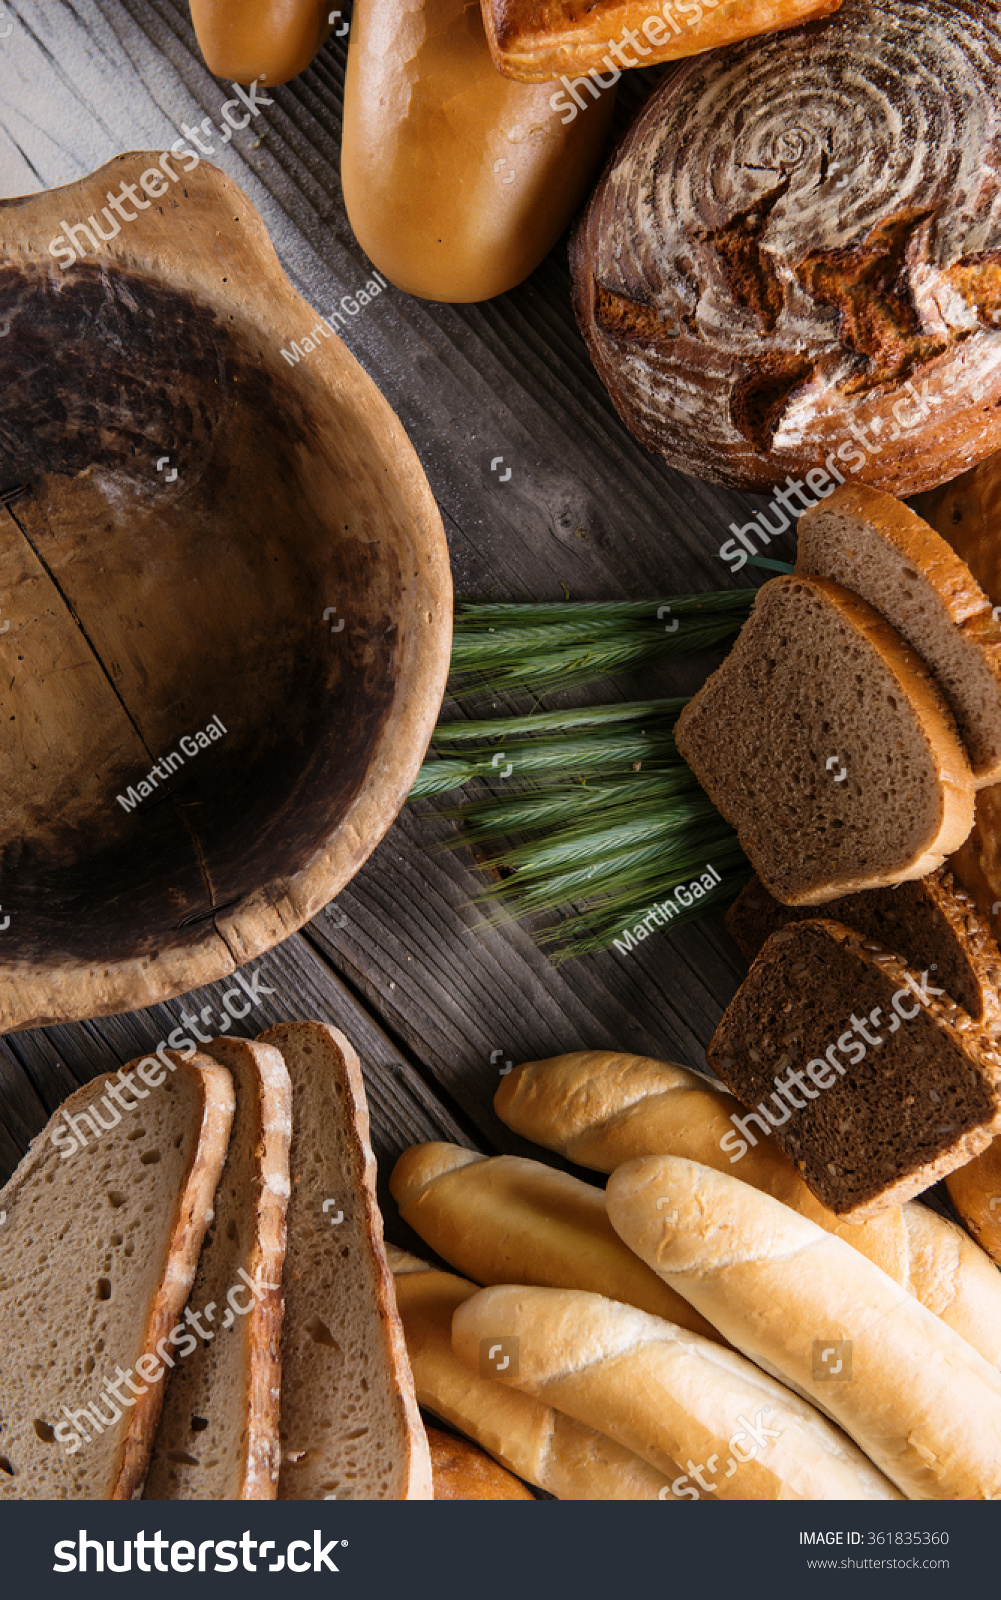 rolls and breads on wooden table with wooden bowl, background for bakery or market #361835360